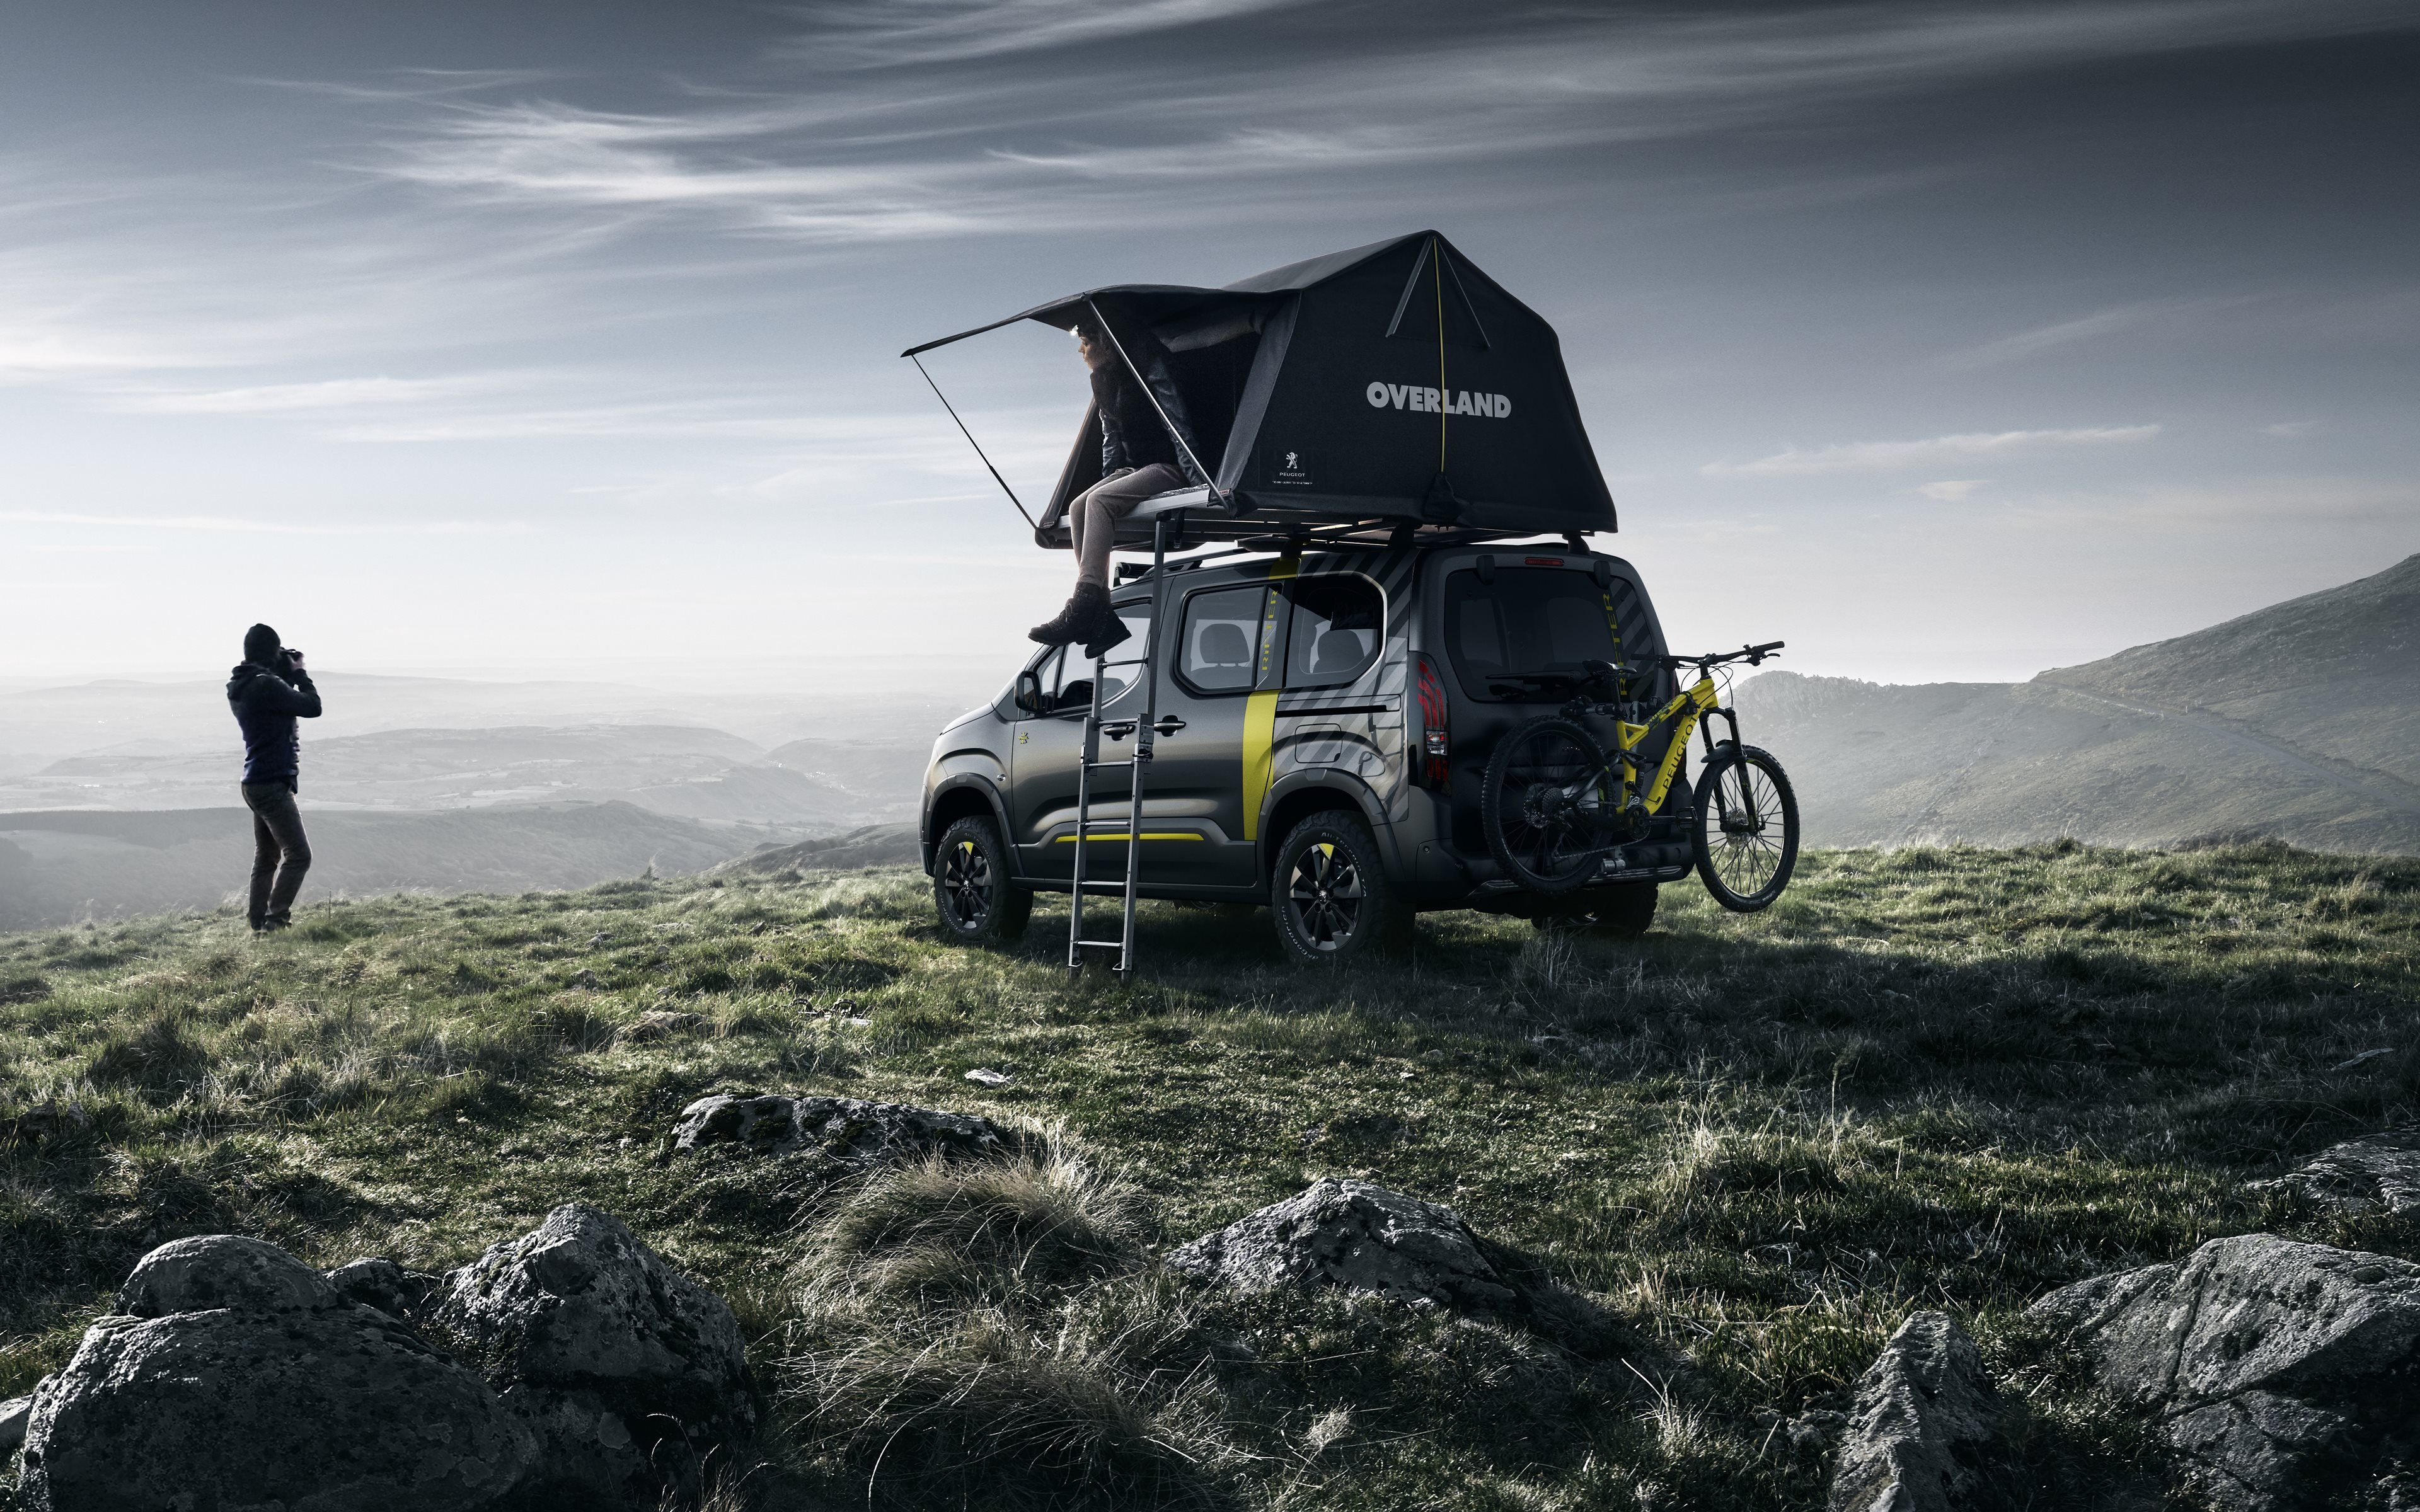 Download wallpaper Peugeot Rifter, travel by car, tent on the roof, tuning, mountains, new black Rifter, Peugeot for desktop with resolution 3840x2400. High Quality HD picture wallpaper